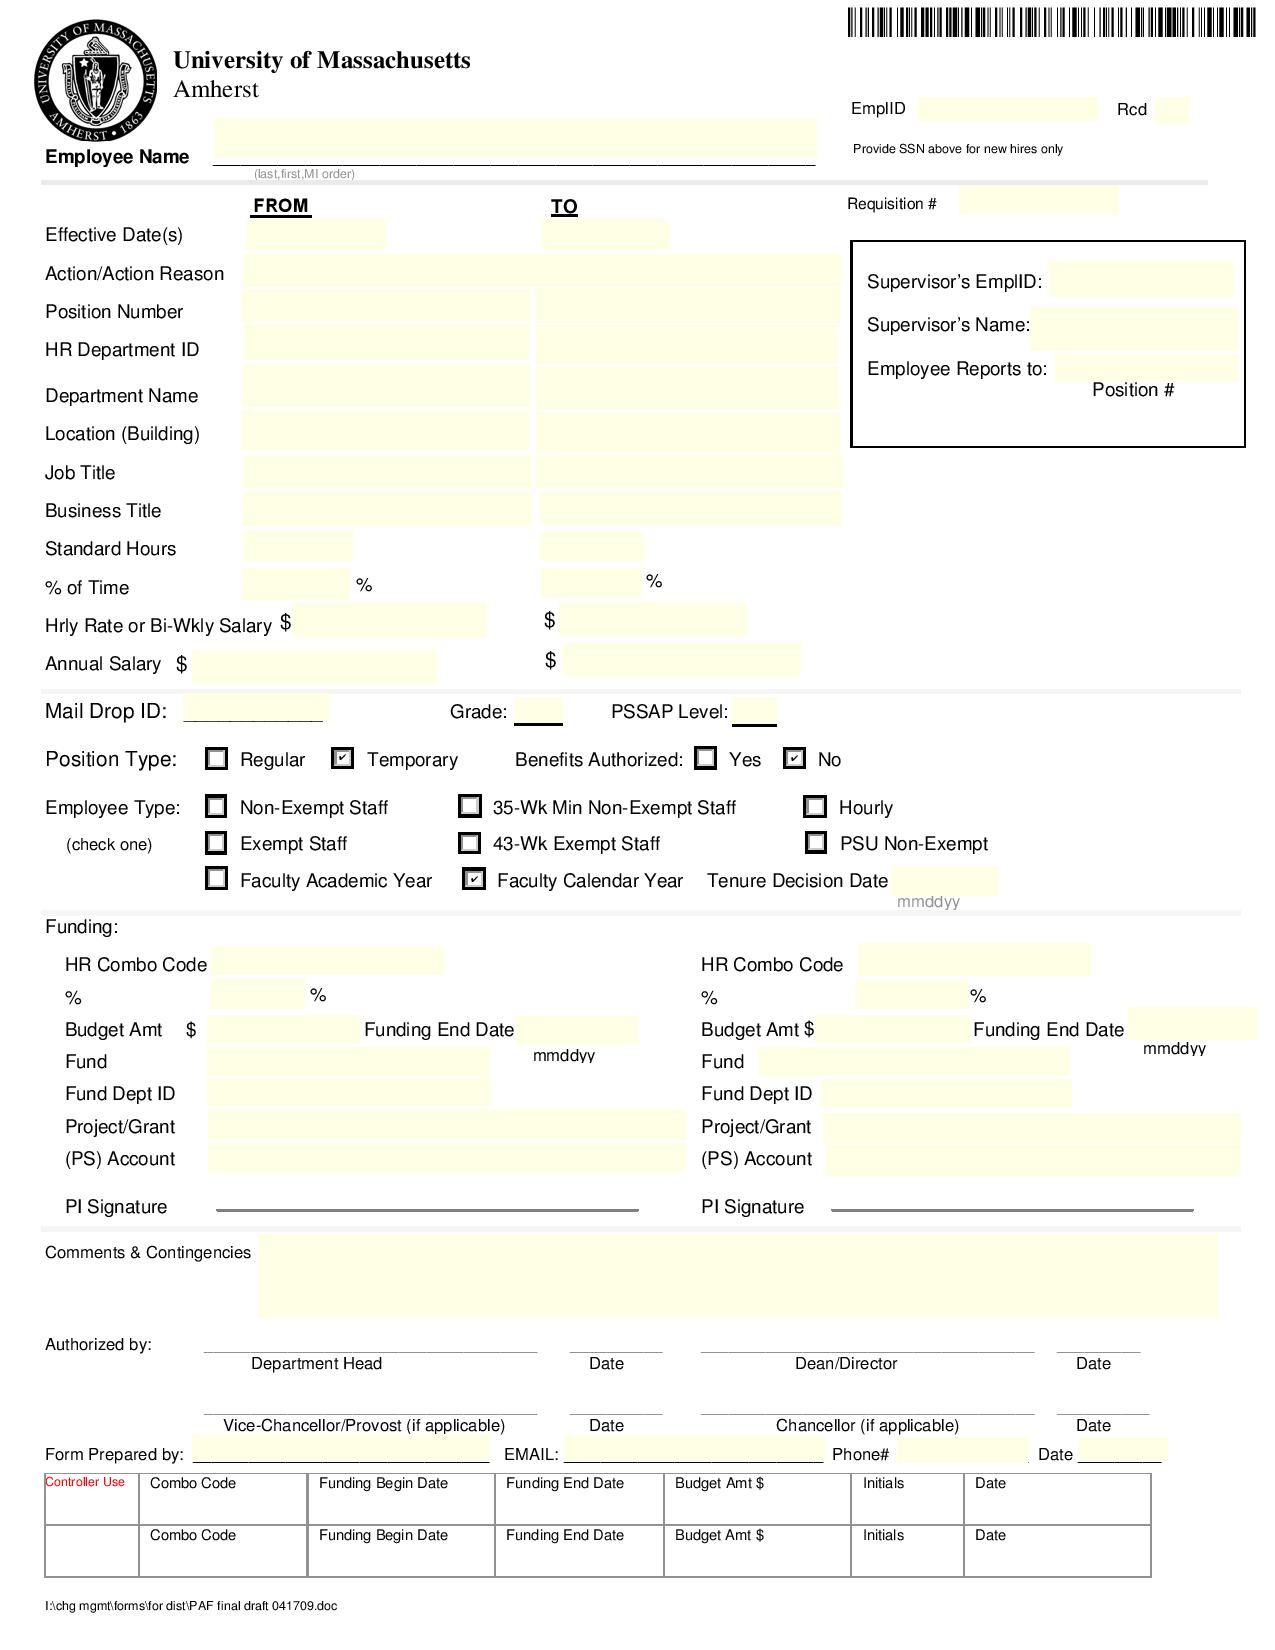 paf personnel action form template page 0013